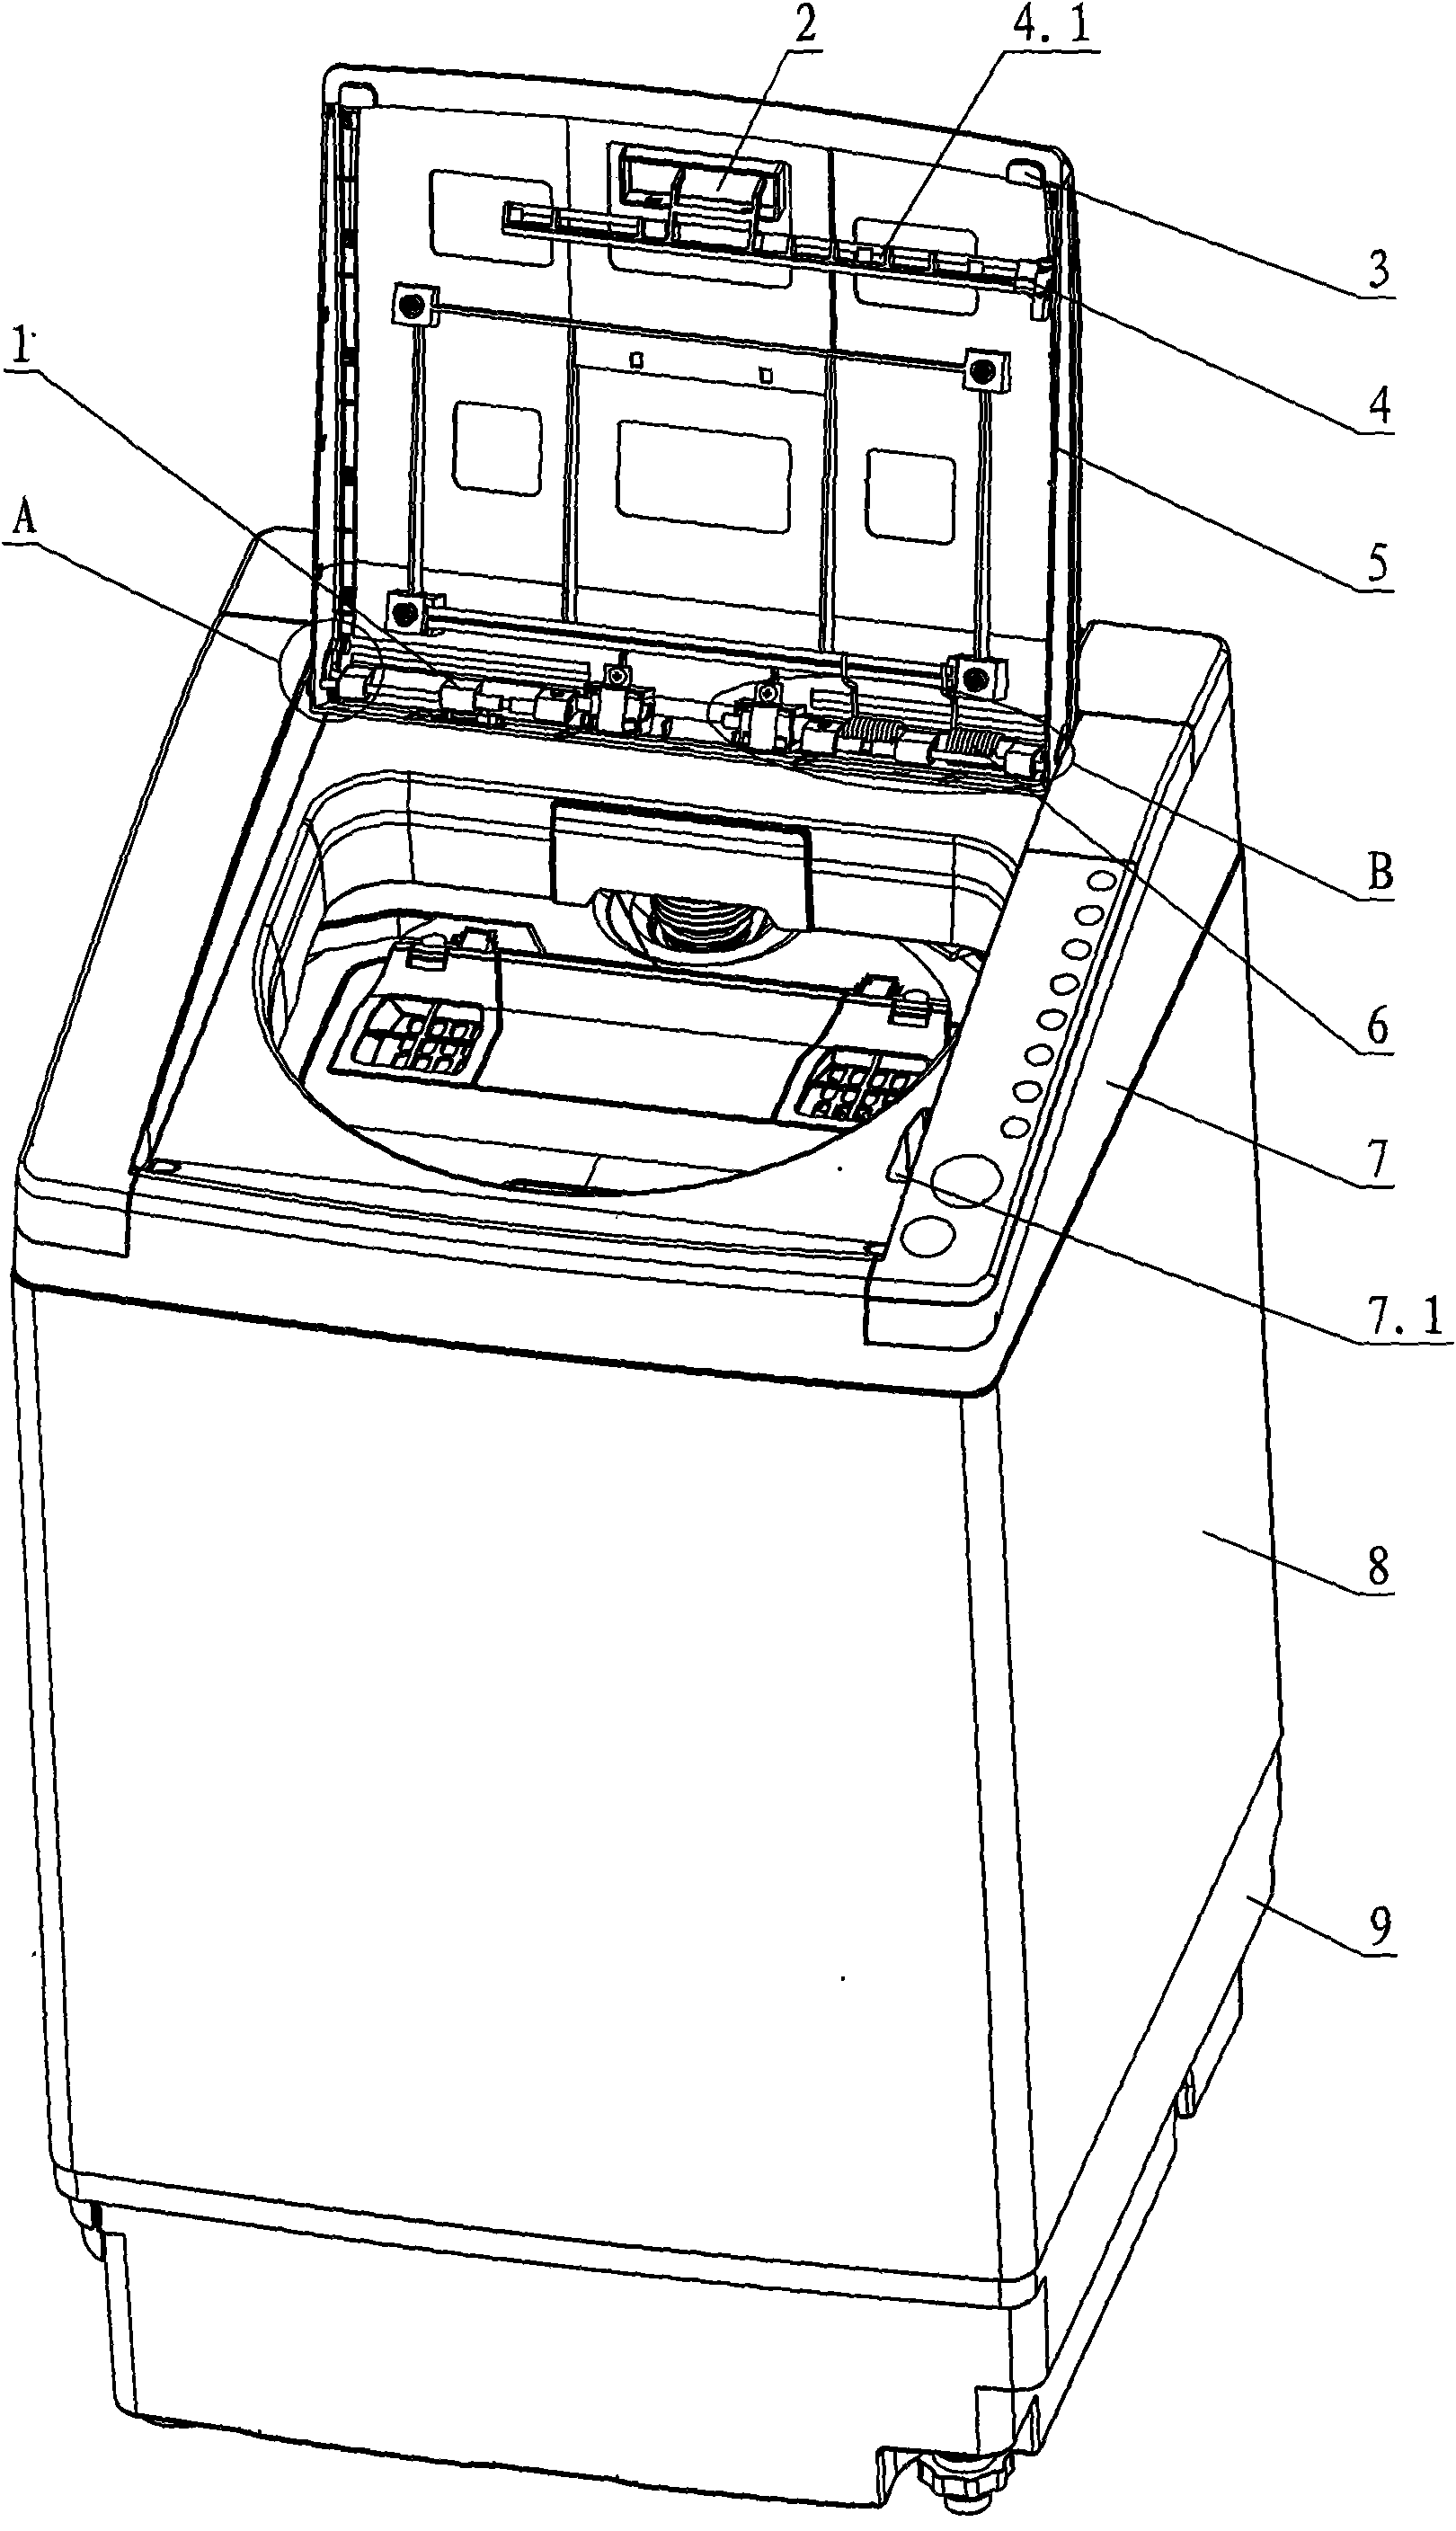 Cover structure of washing machine